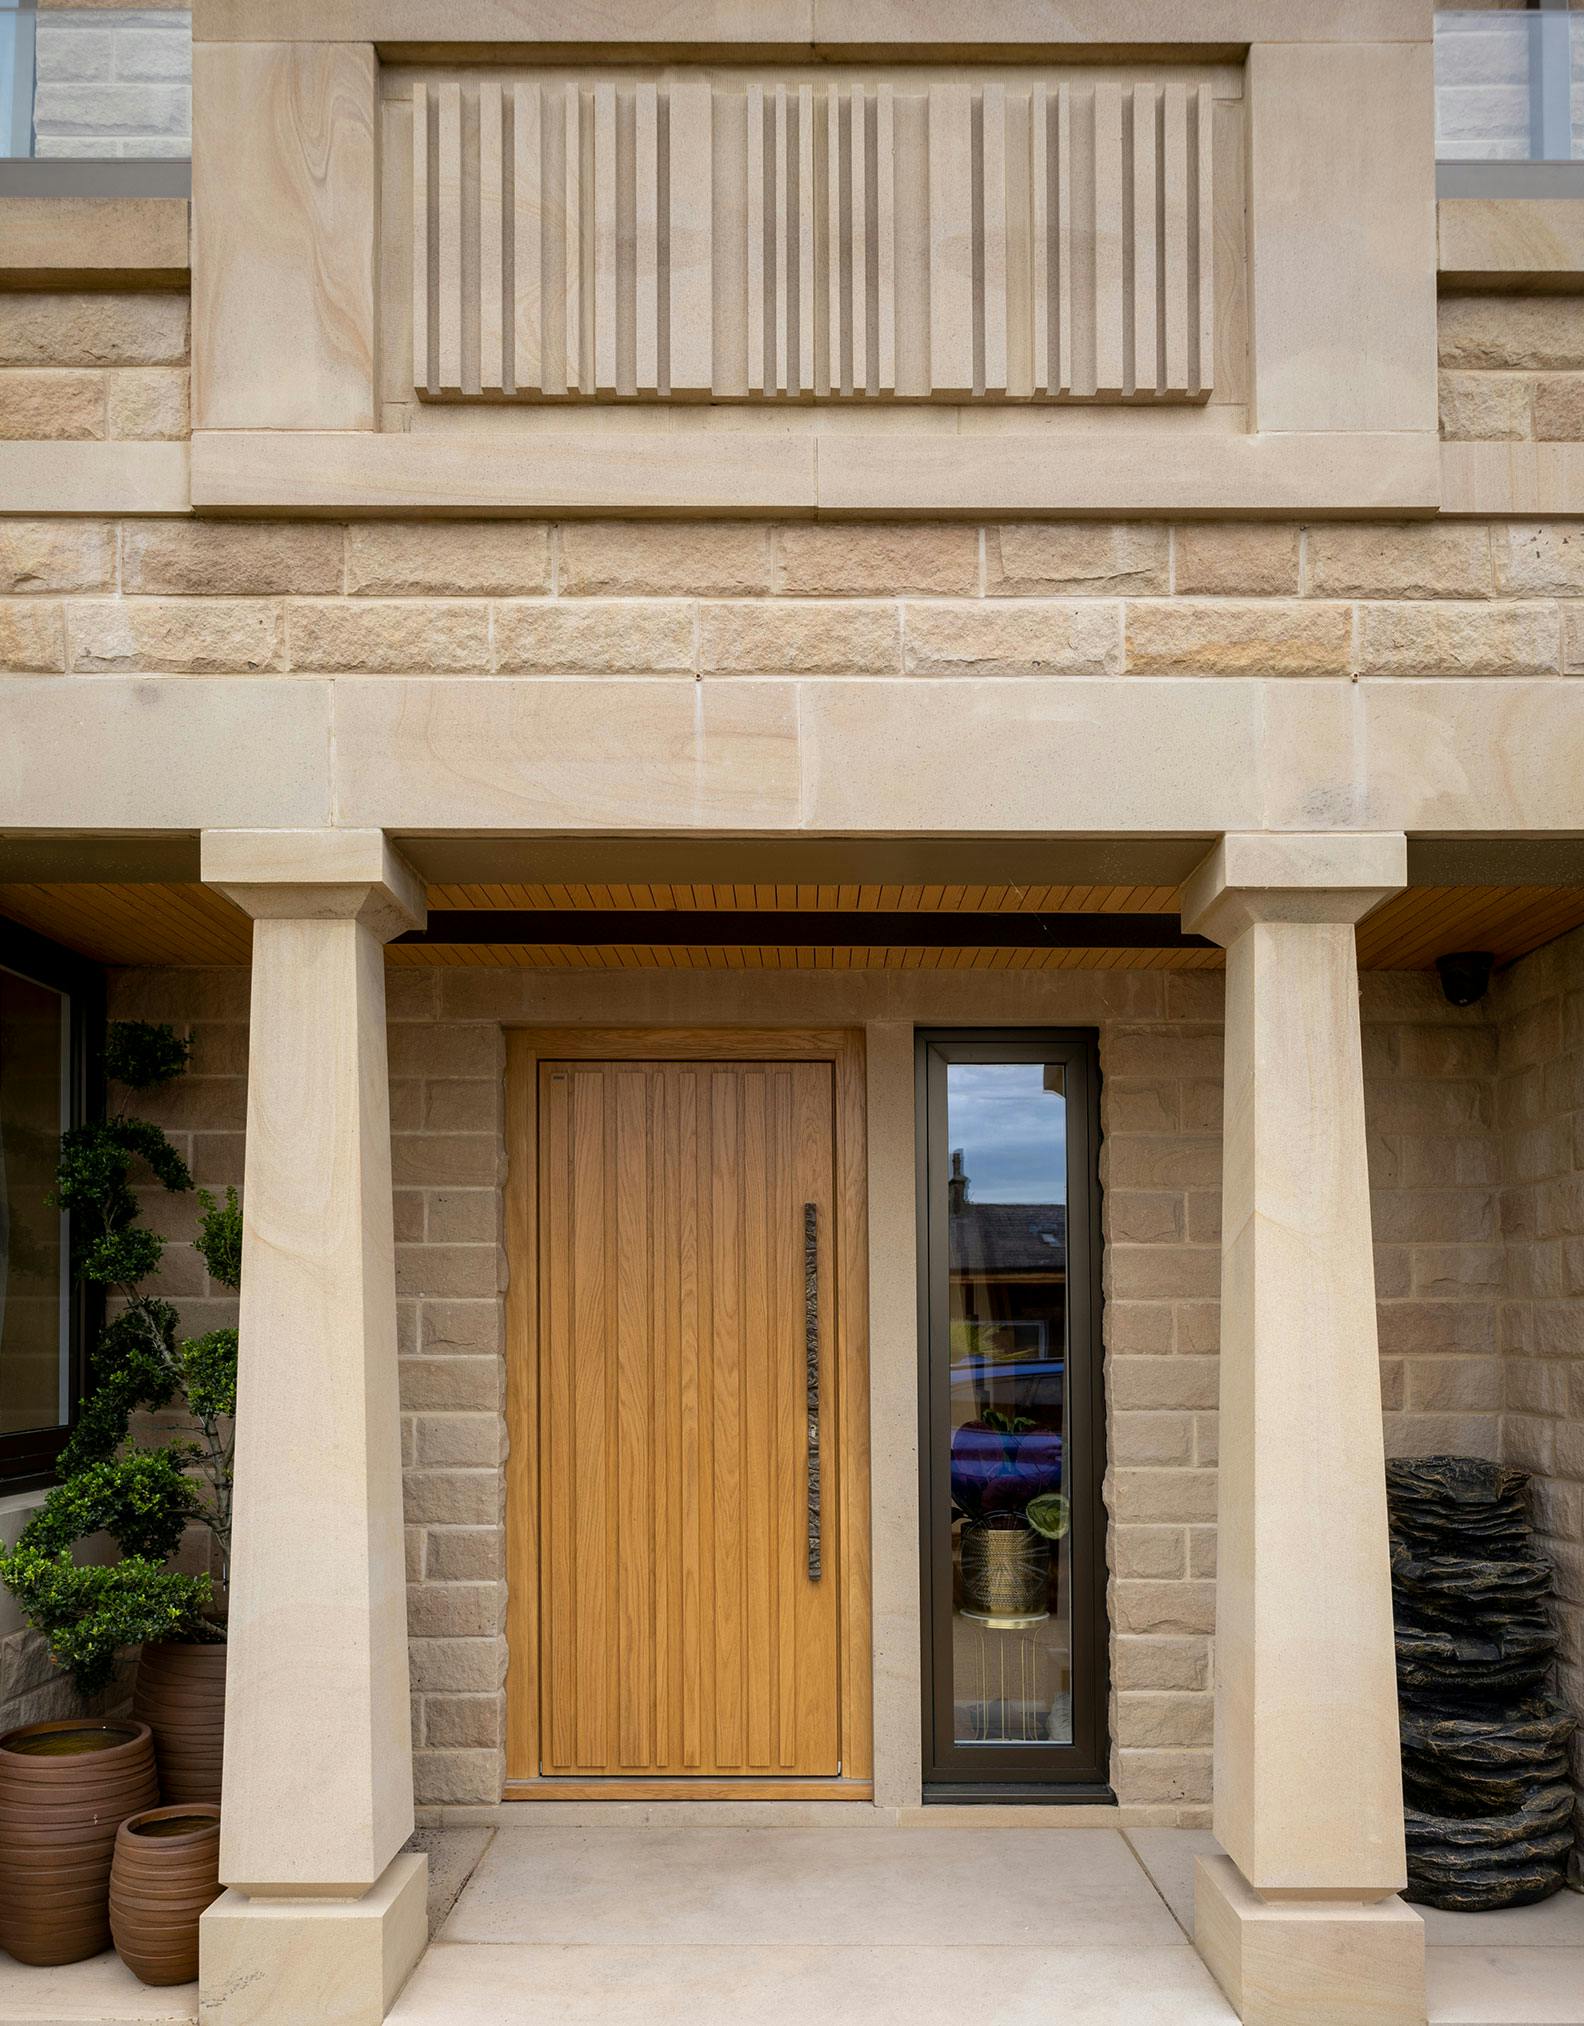 Light Yorkshire stone home entrance with a contemporary Deuren front door - The Pianura design has irregular vertical rised strips and is in a honey oak finish.